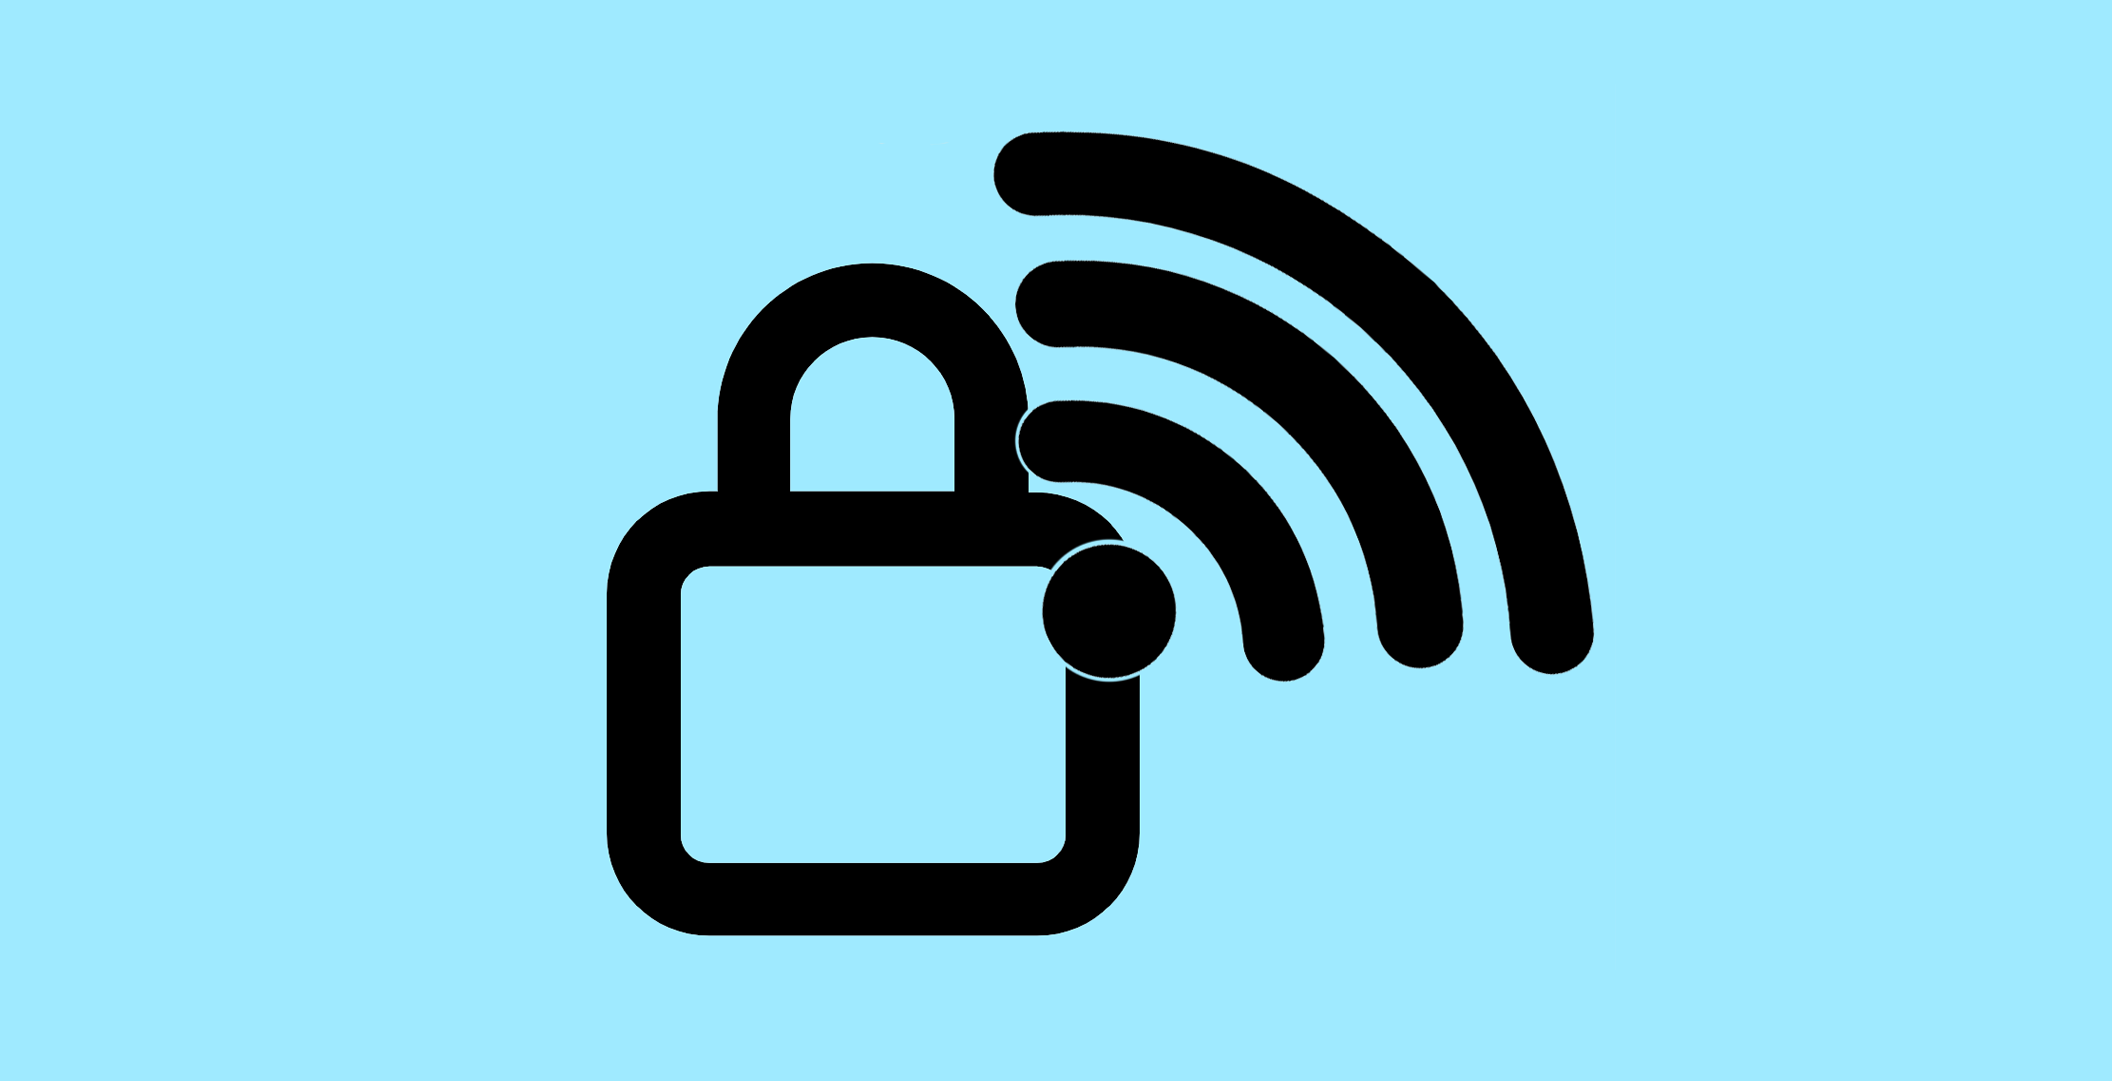 How to get Stored WiFi Passwords in Windows